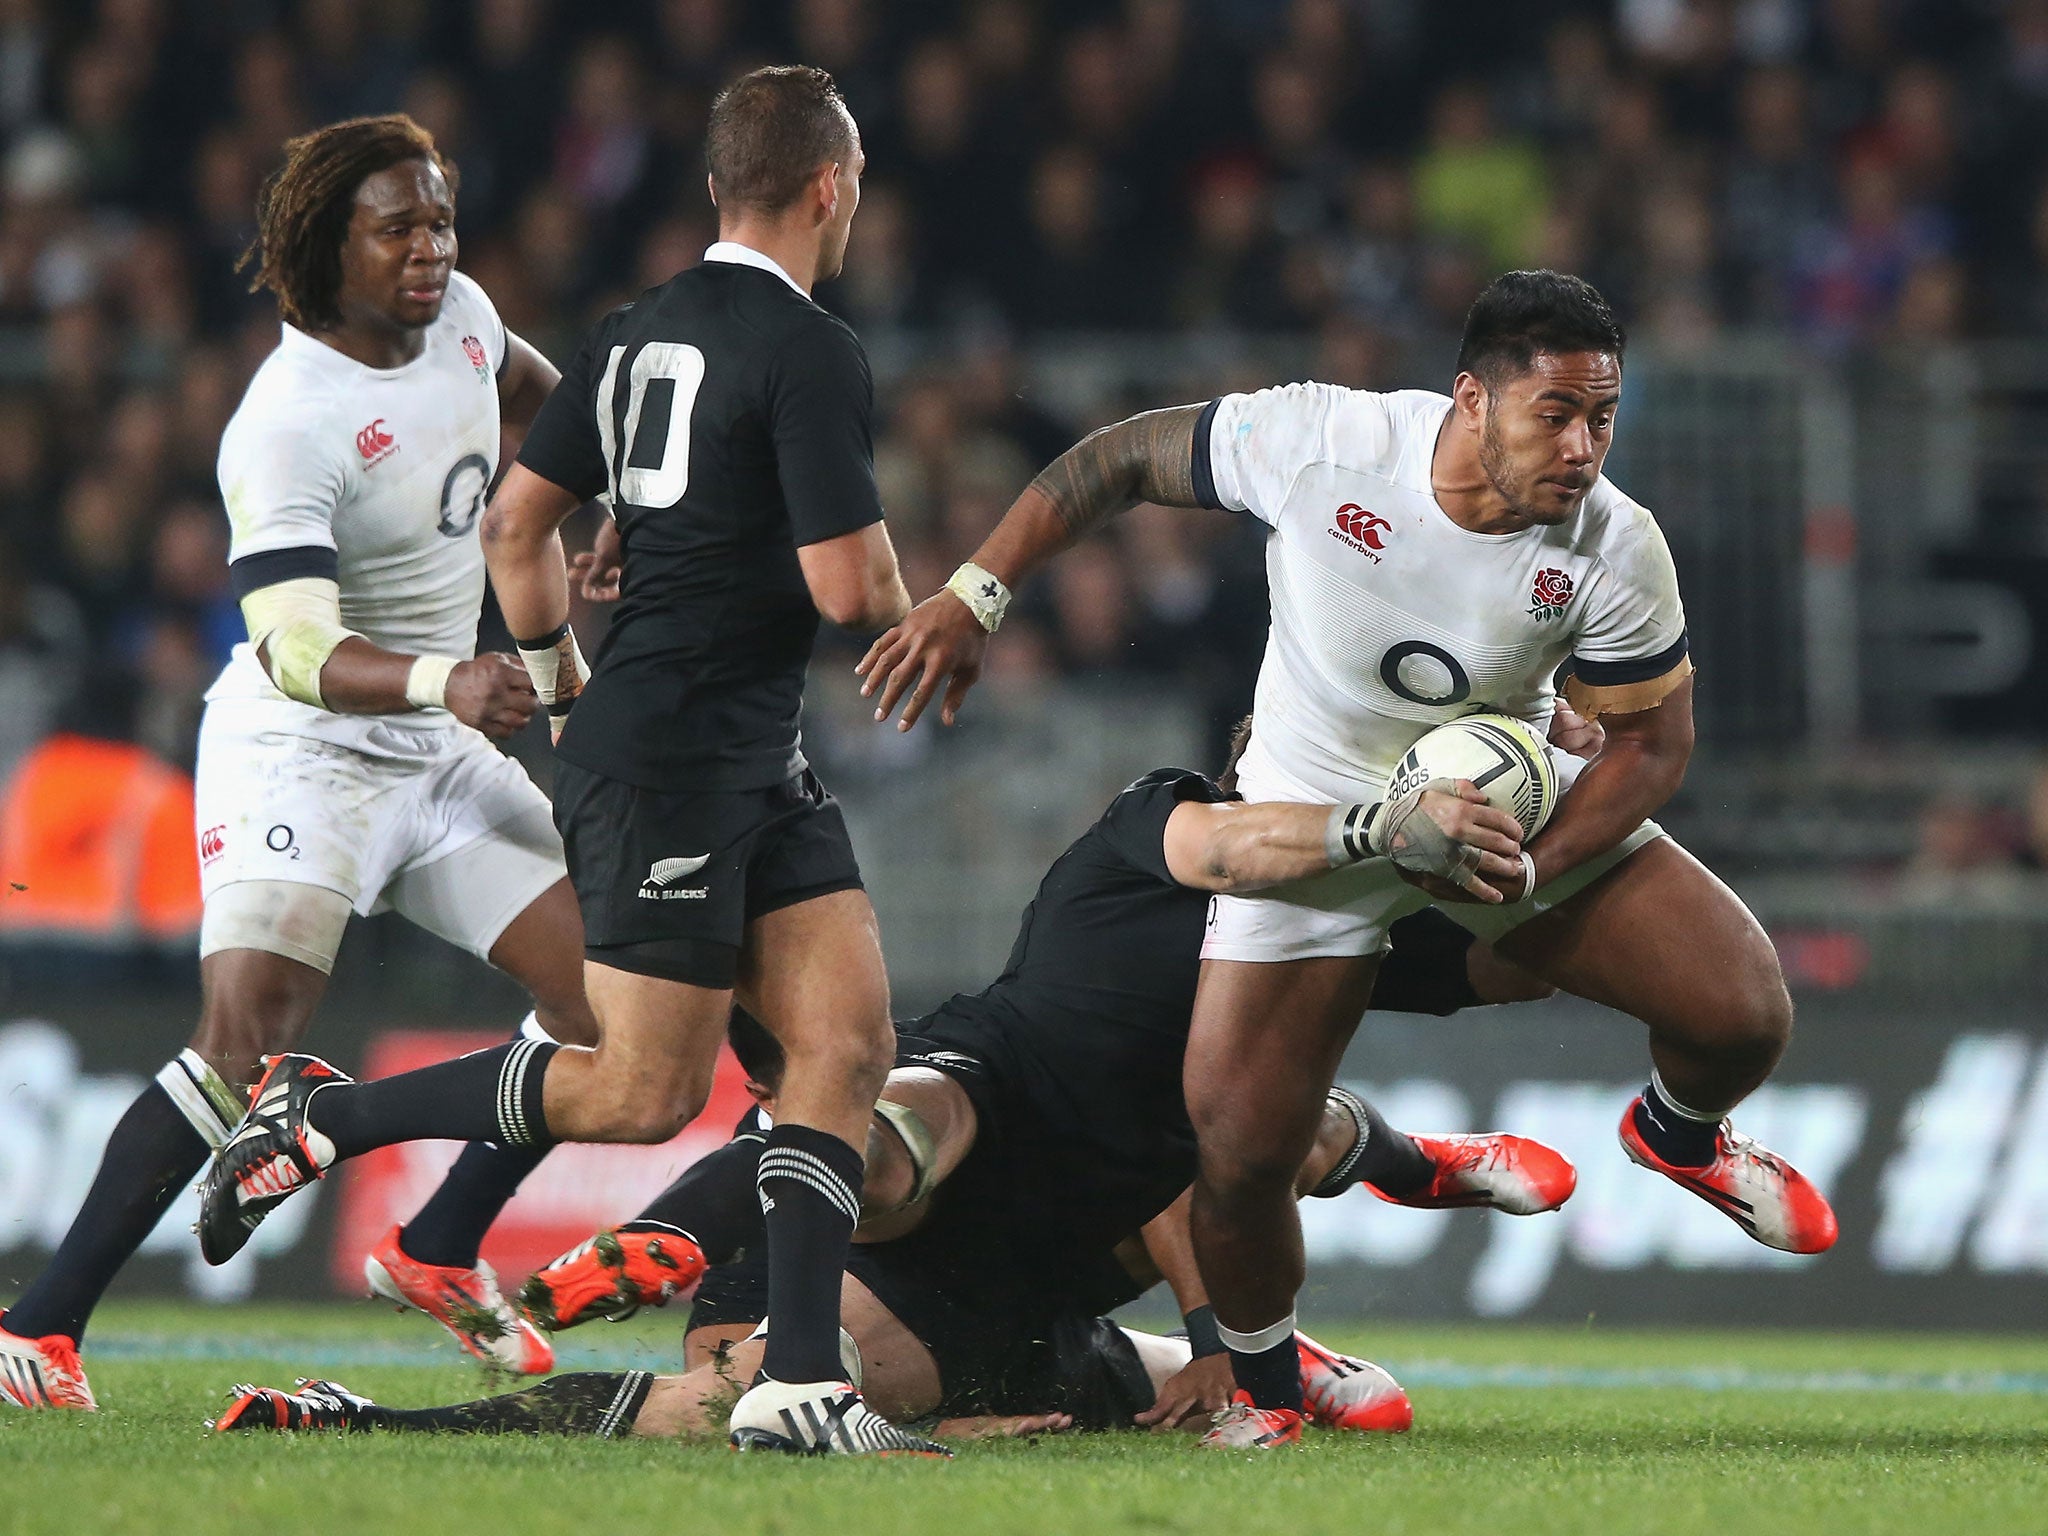 Manu Tuilagi breaks through the New Zealand defence during England's narrow 20-15 defeat